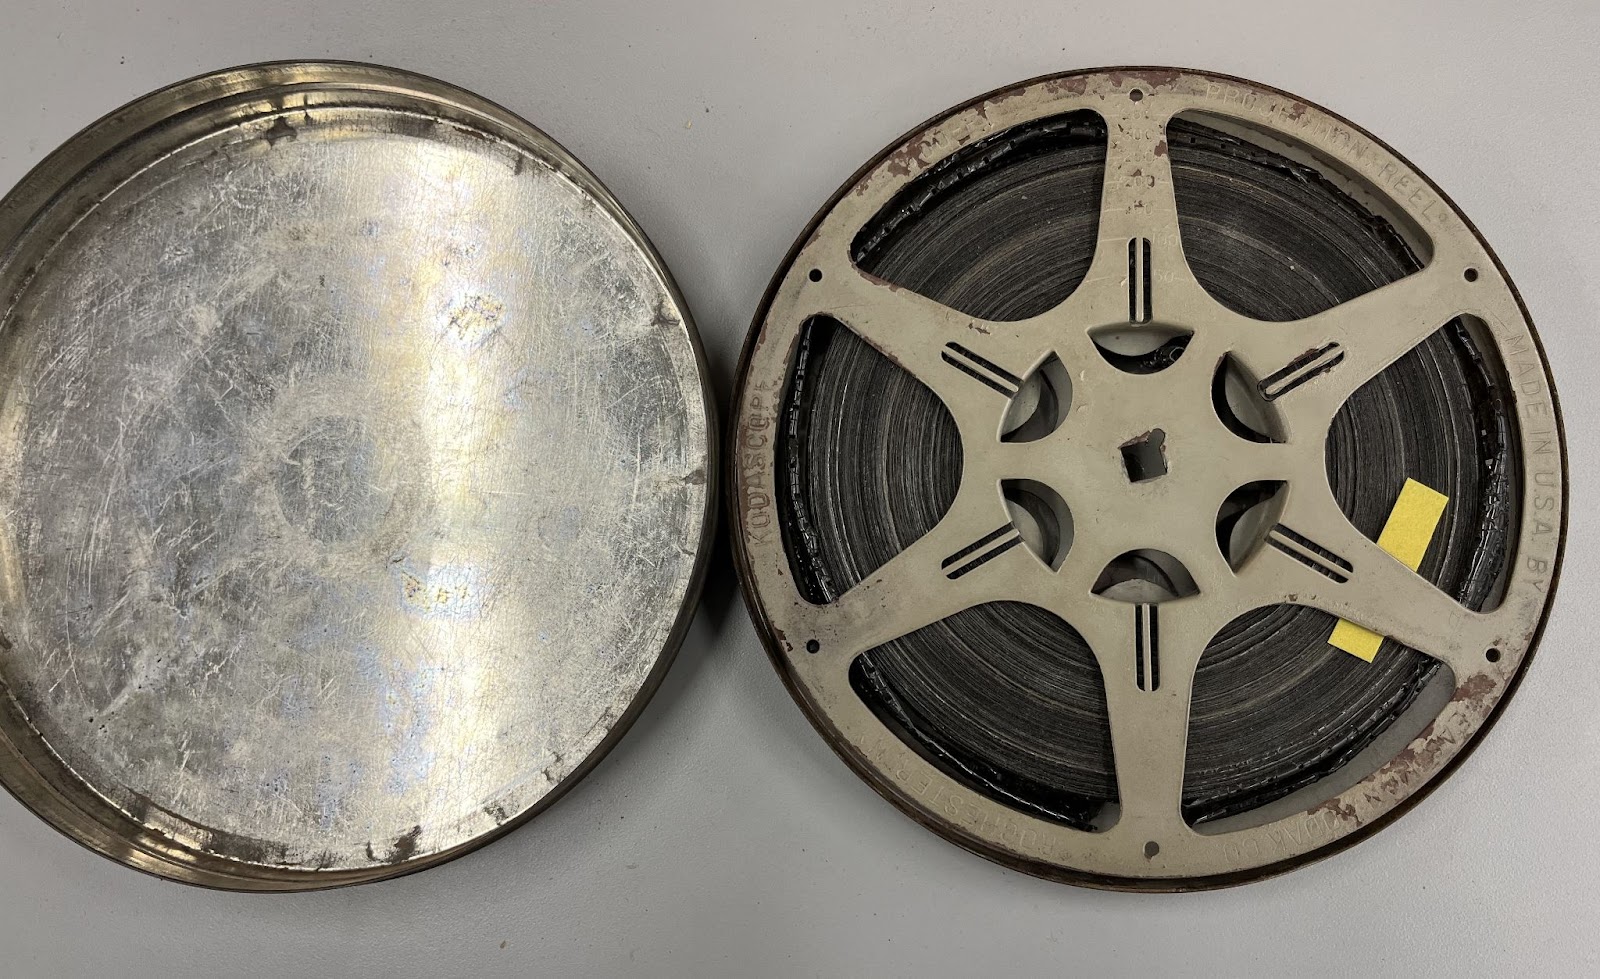 Metal can holding film reel with yellow test strip tucked in